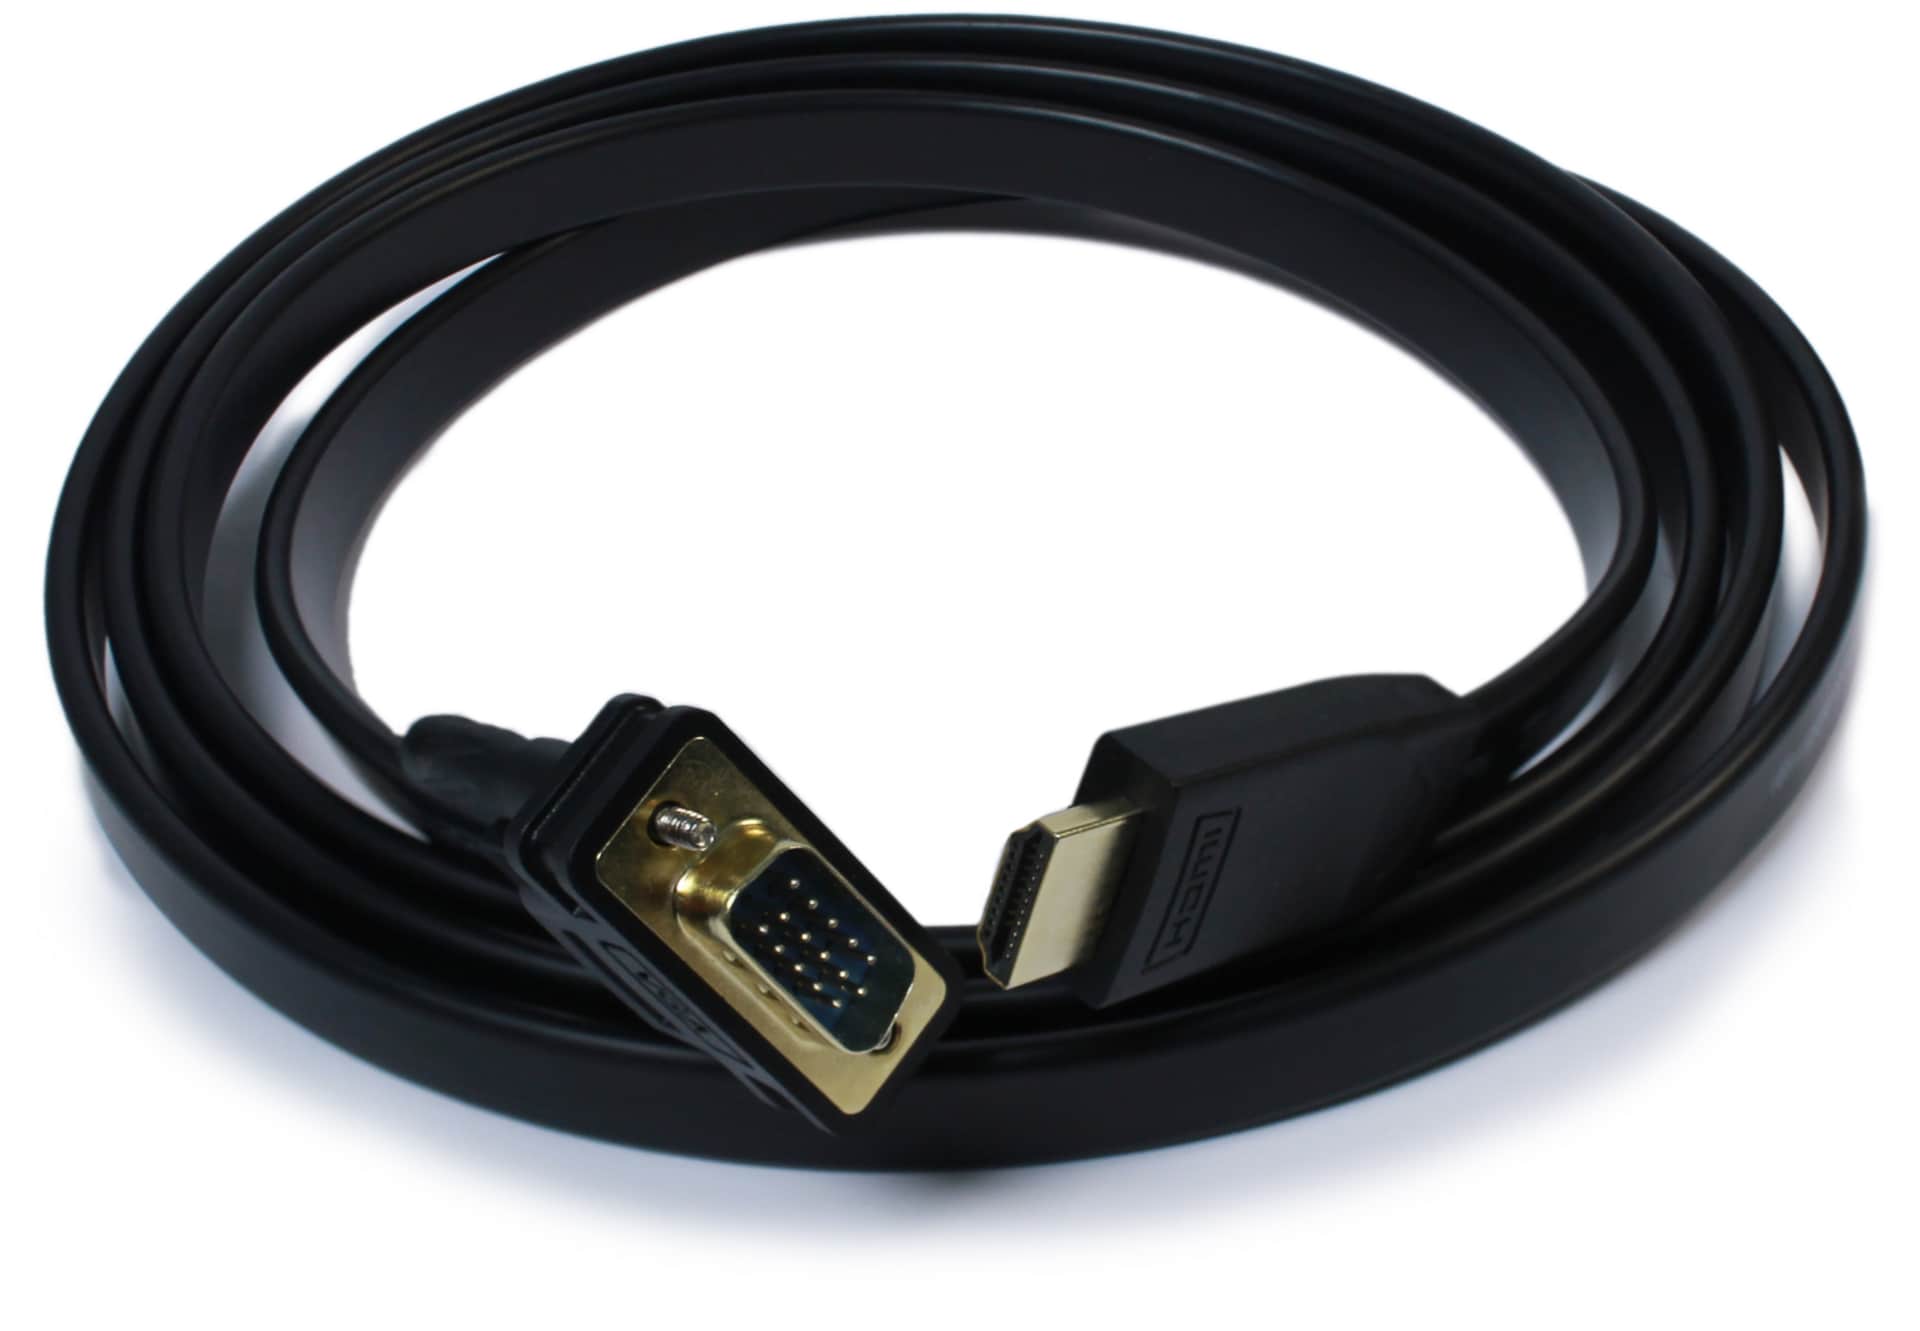 Plugable HDMI To VGA Adapter,6 Foot (1.8 Meter) Converter Cable Supporting Up To 1920 x 1080 (60Hz),Driverless